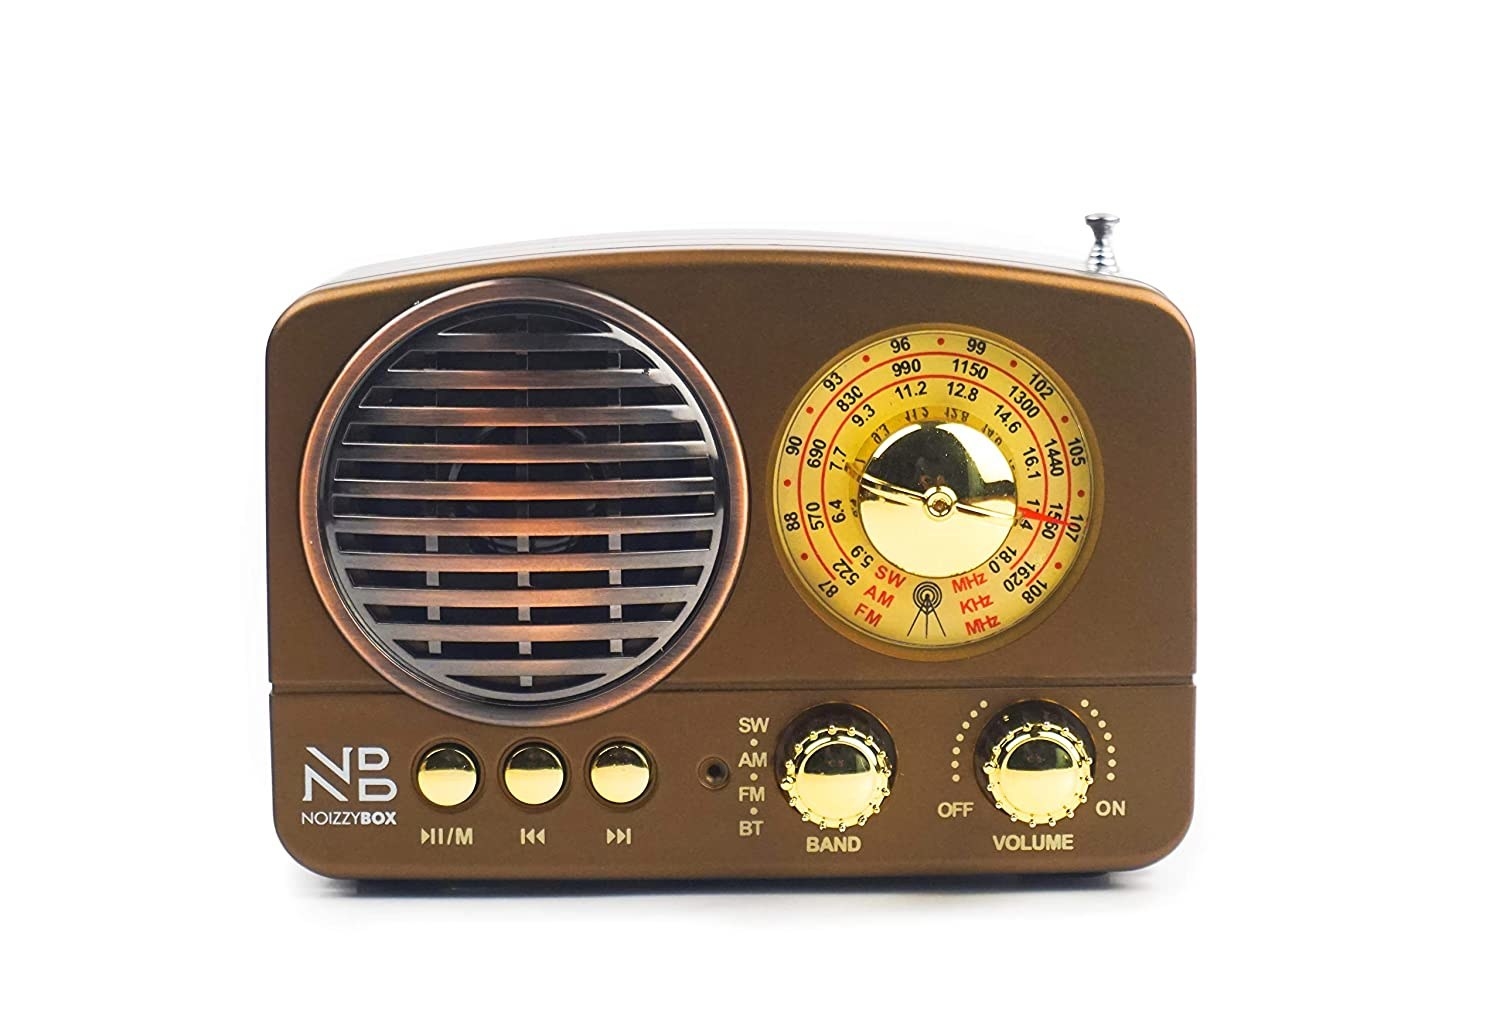 A Bluetooth speaker in the shape of a vintage radio.